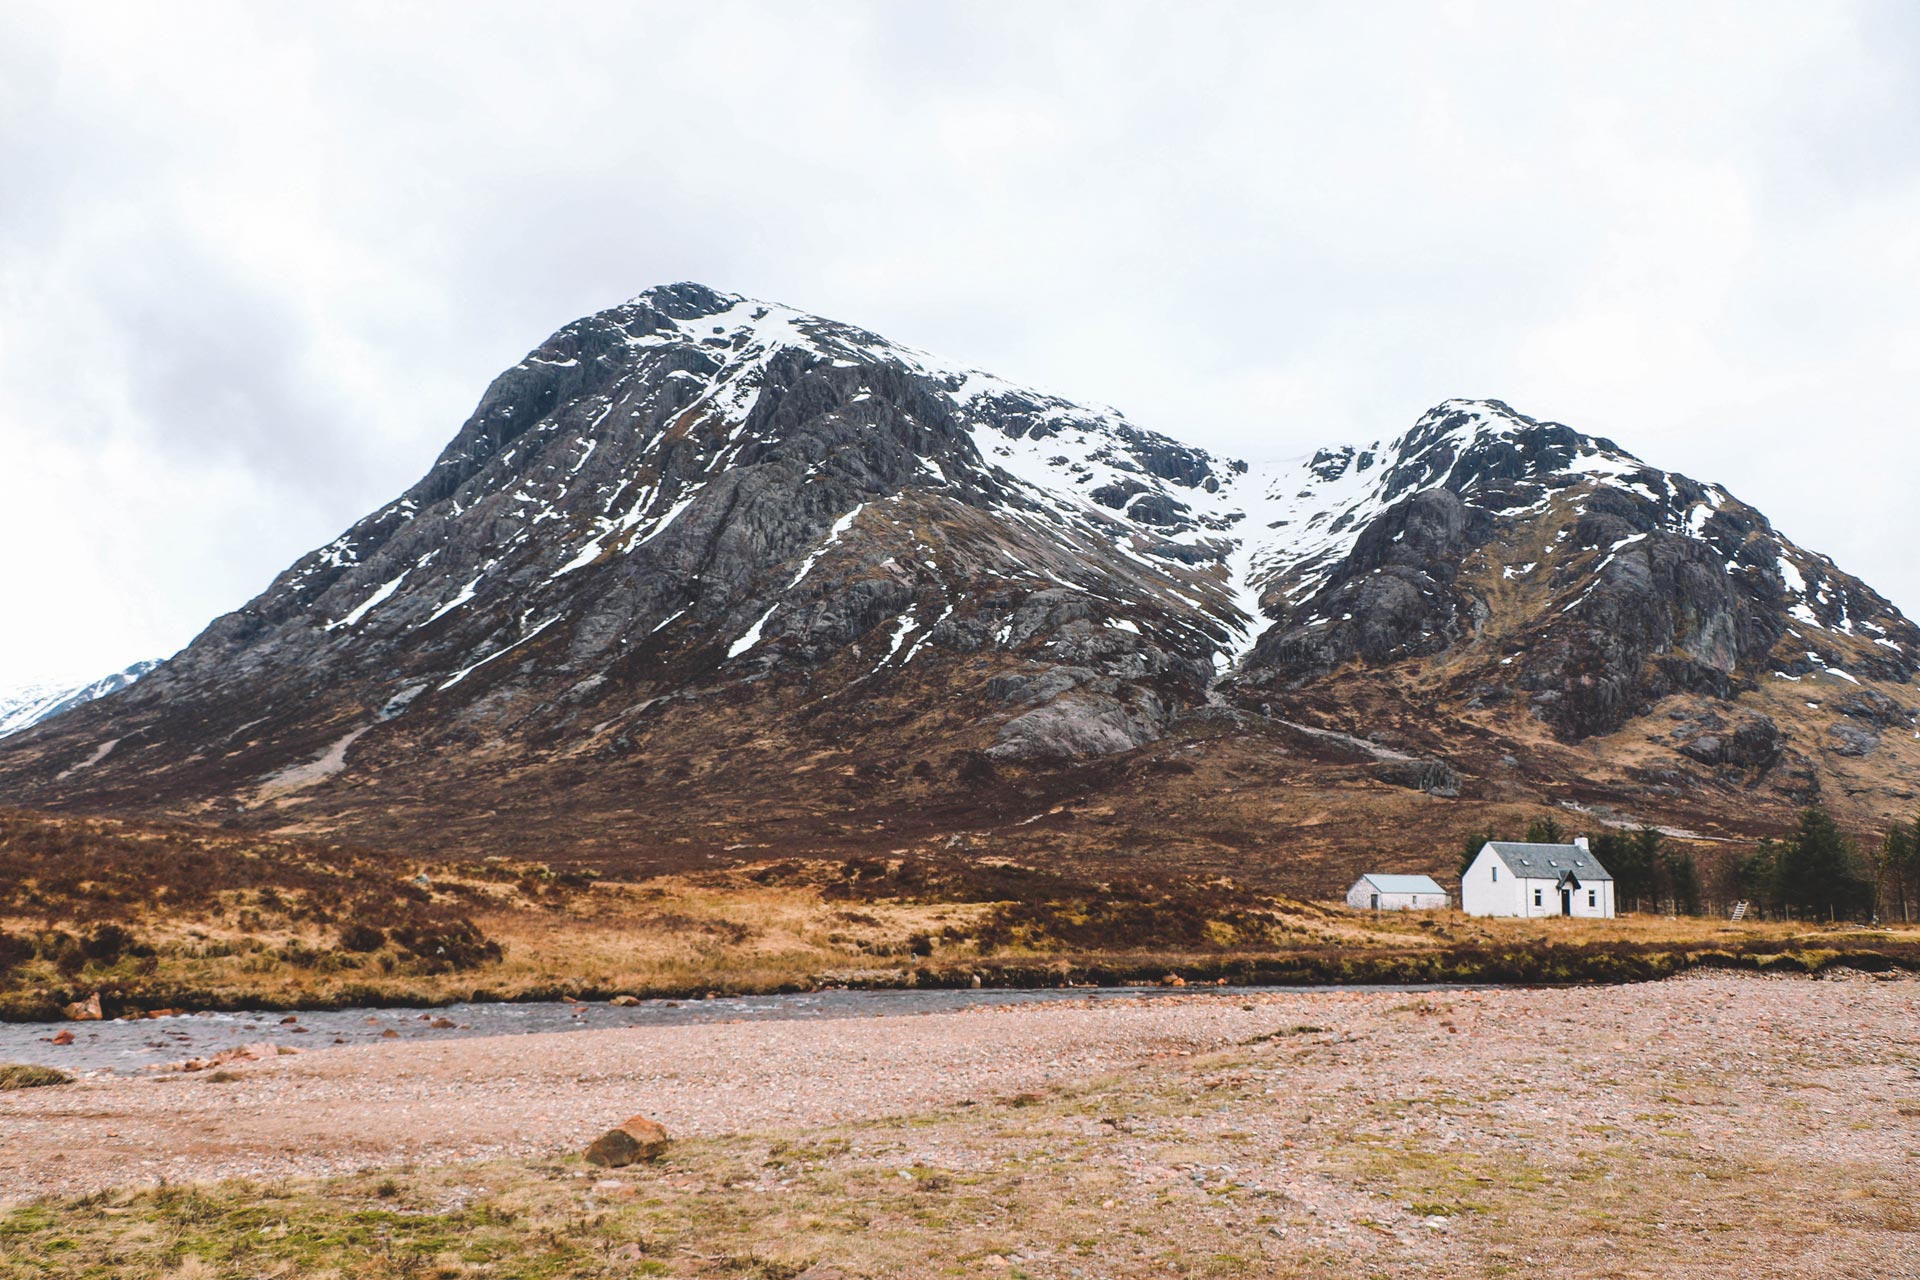 Lagangarbh Hut and barn Glencoe Scotland. Both are available for accomodation.